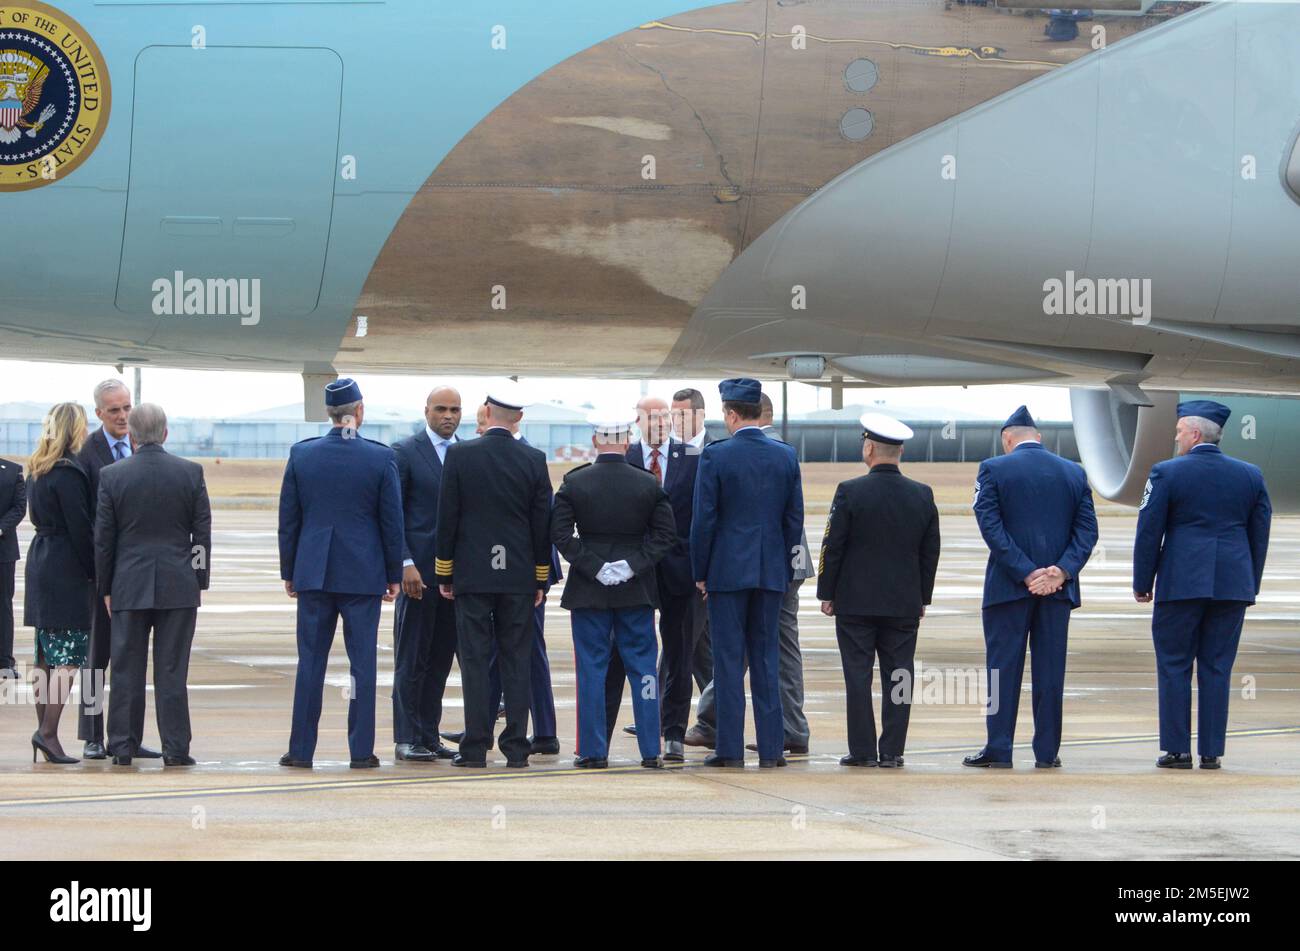 U.S. Representatives Marc Veasey, Colin Allred and Jake Ellzey pause to chat with various key leadership from the Navy, Marines, 10th Air Force and the 136th Airlift Wing, Texas Air National Guard during a presidential stopover of Air Force One. President of the United States Joe Biden arrived at NAS JRB Fort Worth during a visit to Fort Worth addressing veteran care. Stock Photo